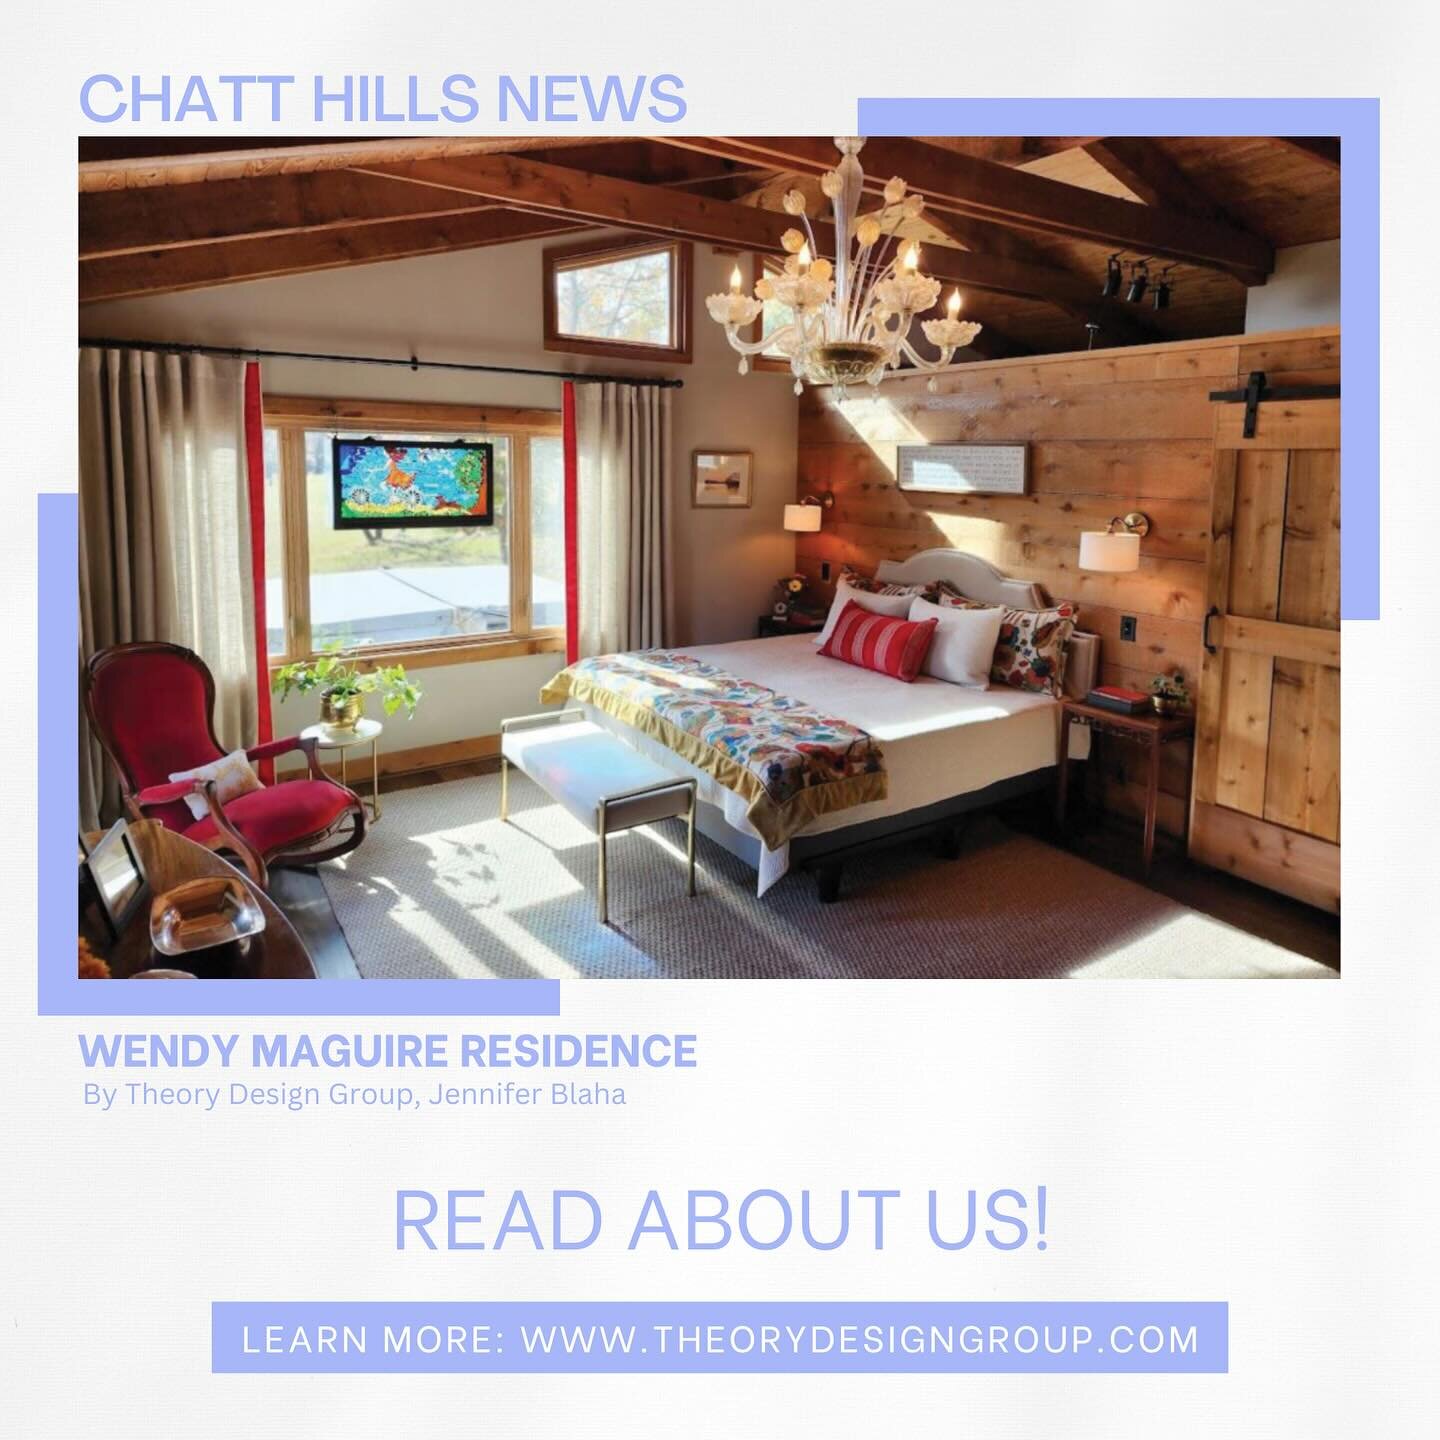 Refresh for a Log Cabin. Master Bedroom and Living Room, before and after photos in reel. Check out the story in the Chatt Hills Newspaper! Link is in our highlights! #interiordesign #theorydesigngroup #logcabindesign